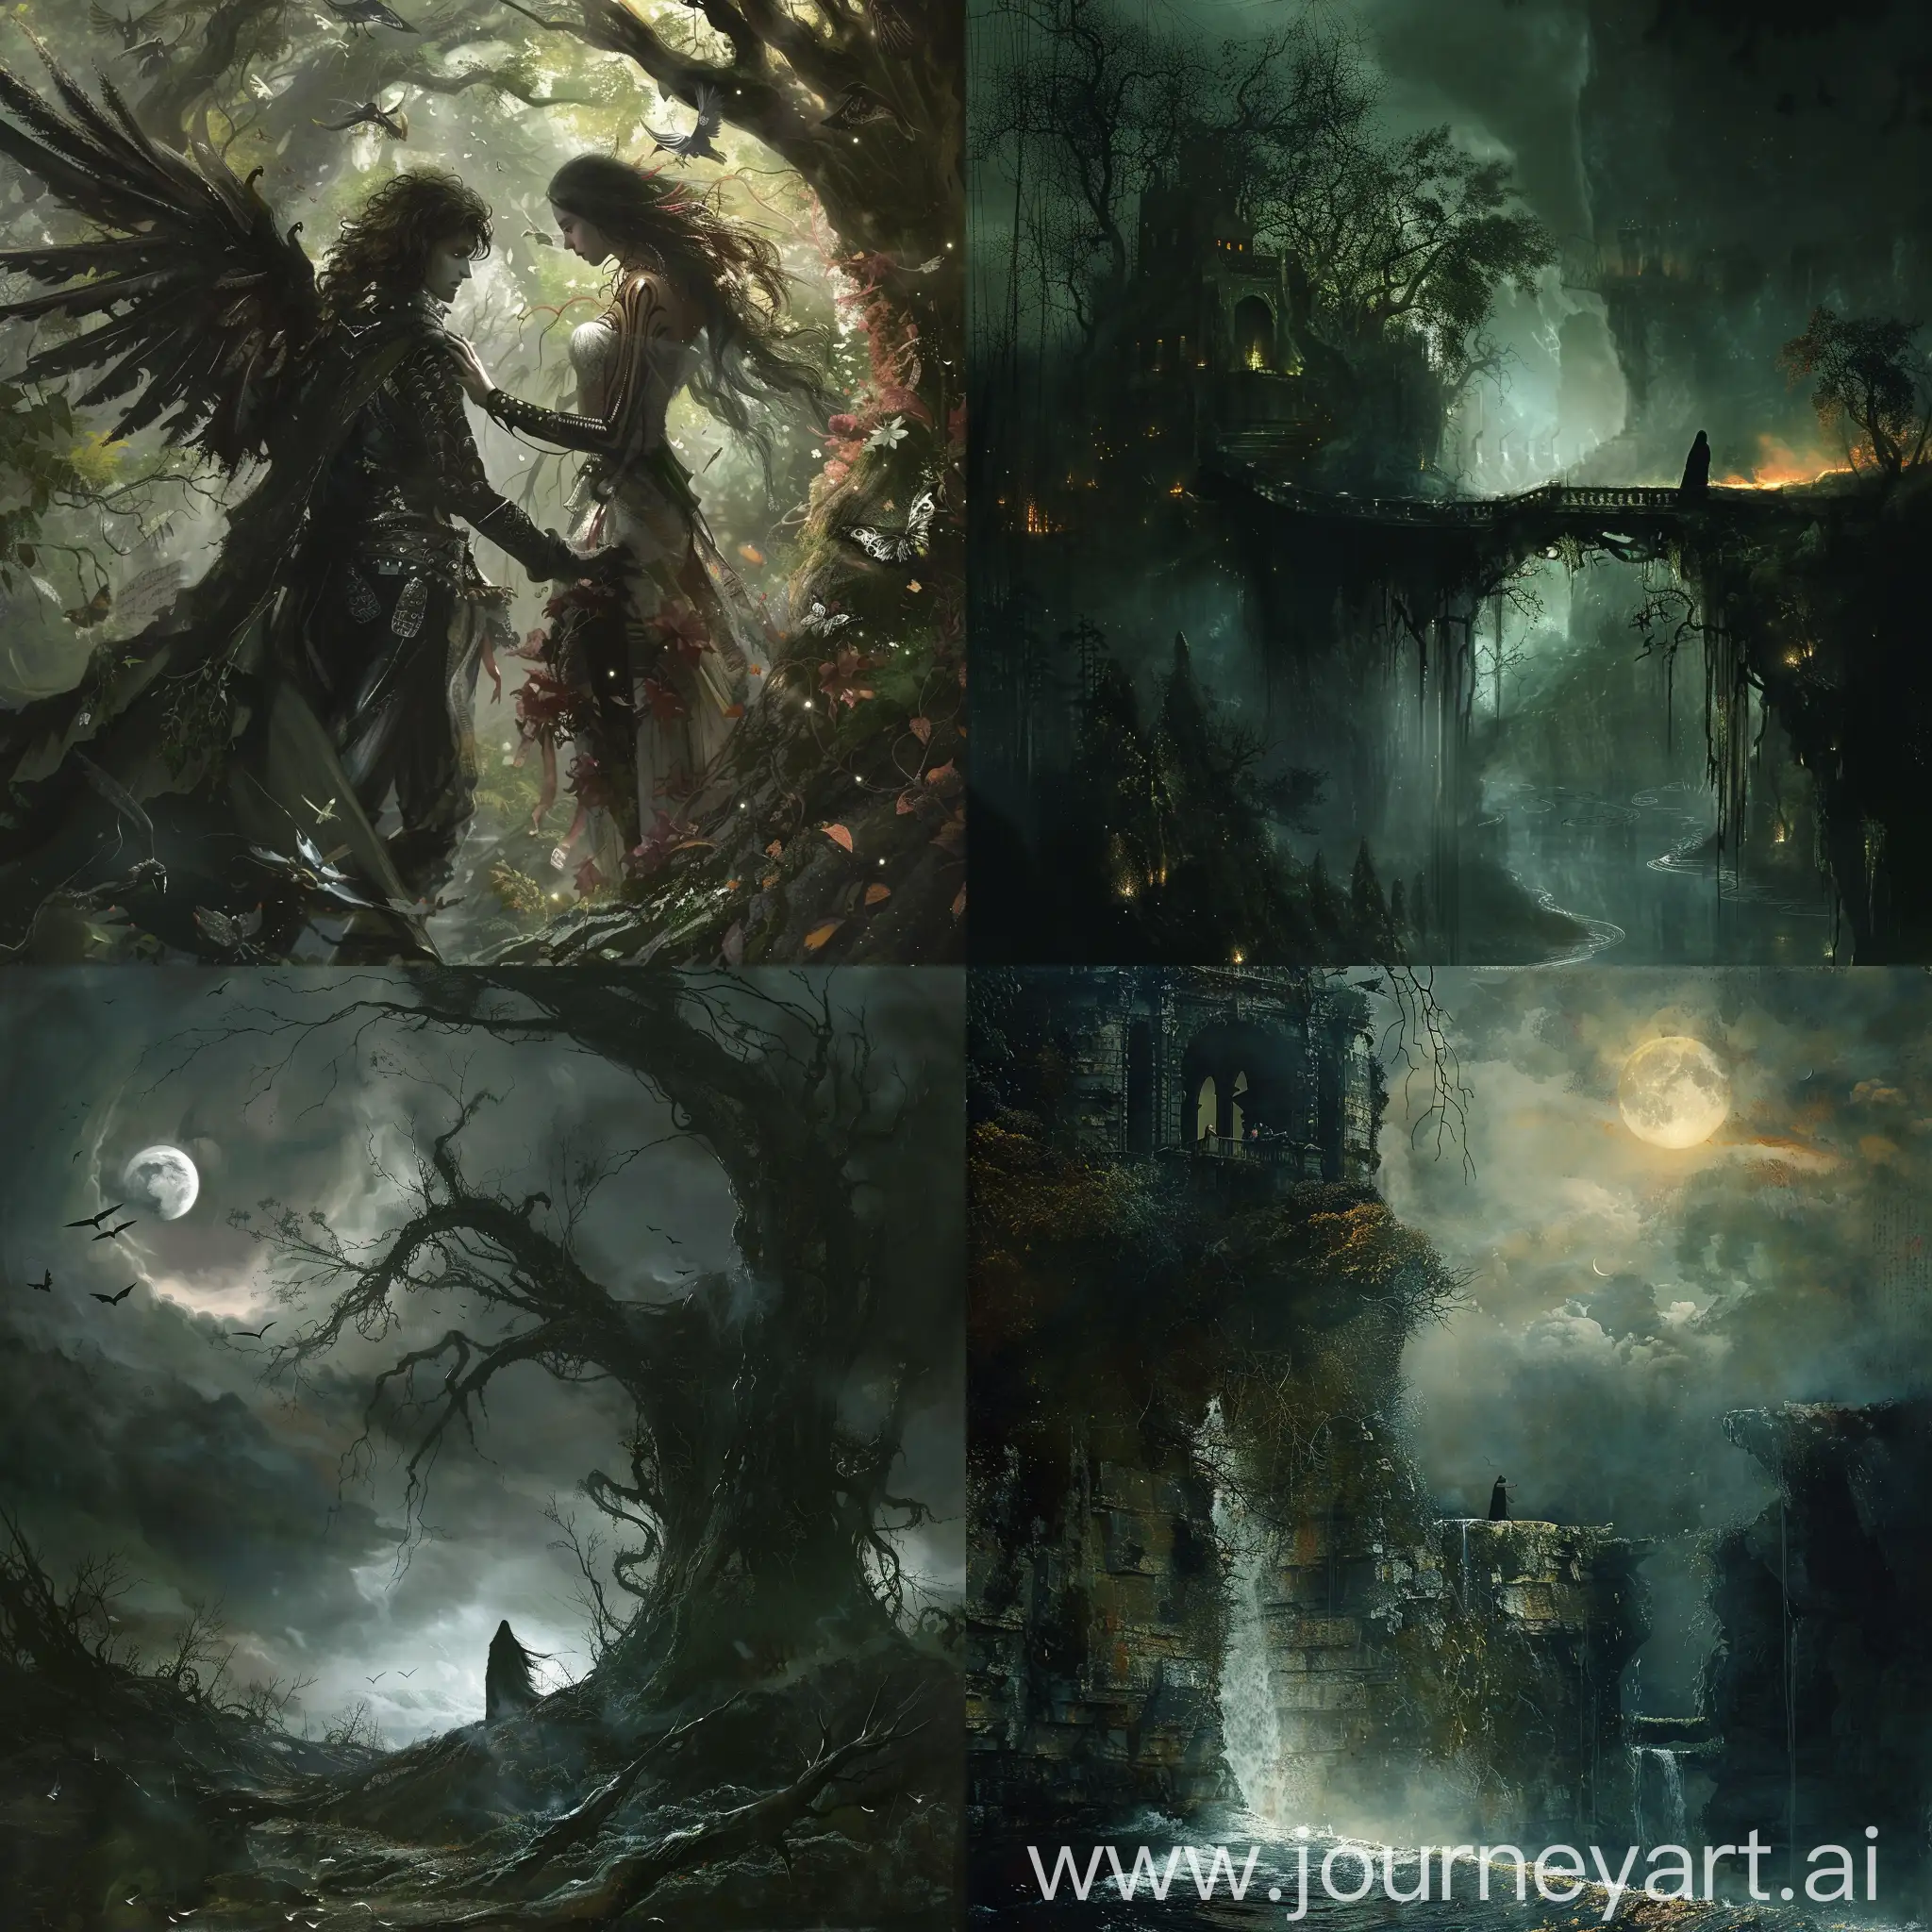 Dark-Fantasy-Scene-with-Mysterious-Figure-in-a-Magical-Forest